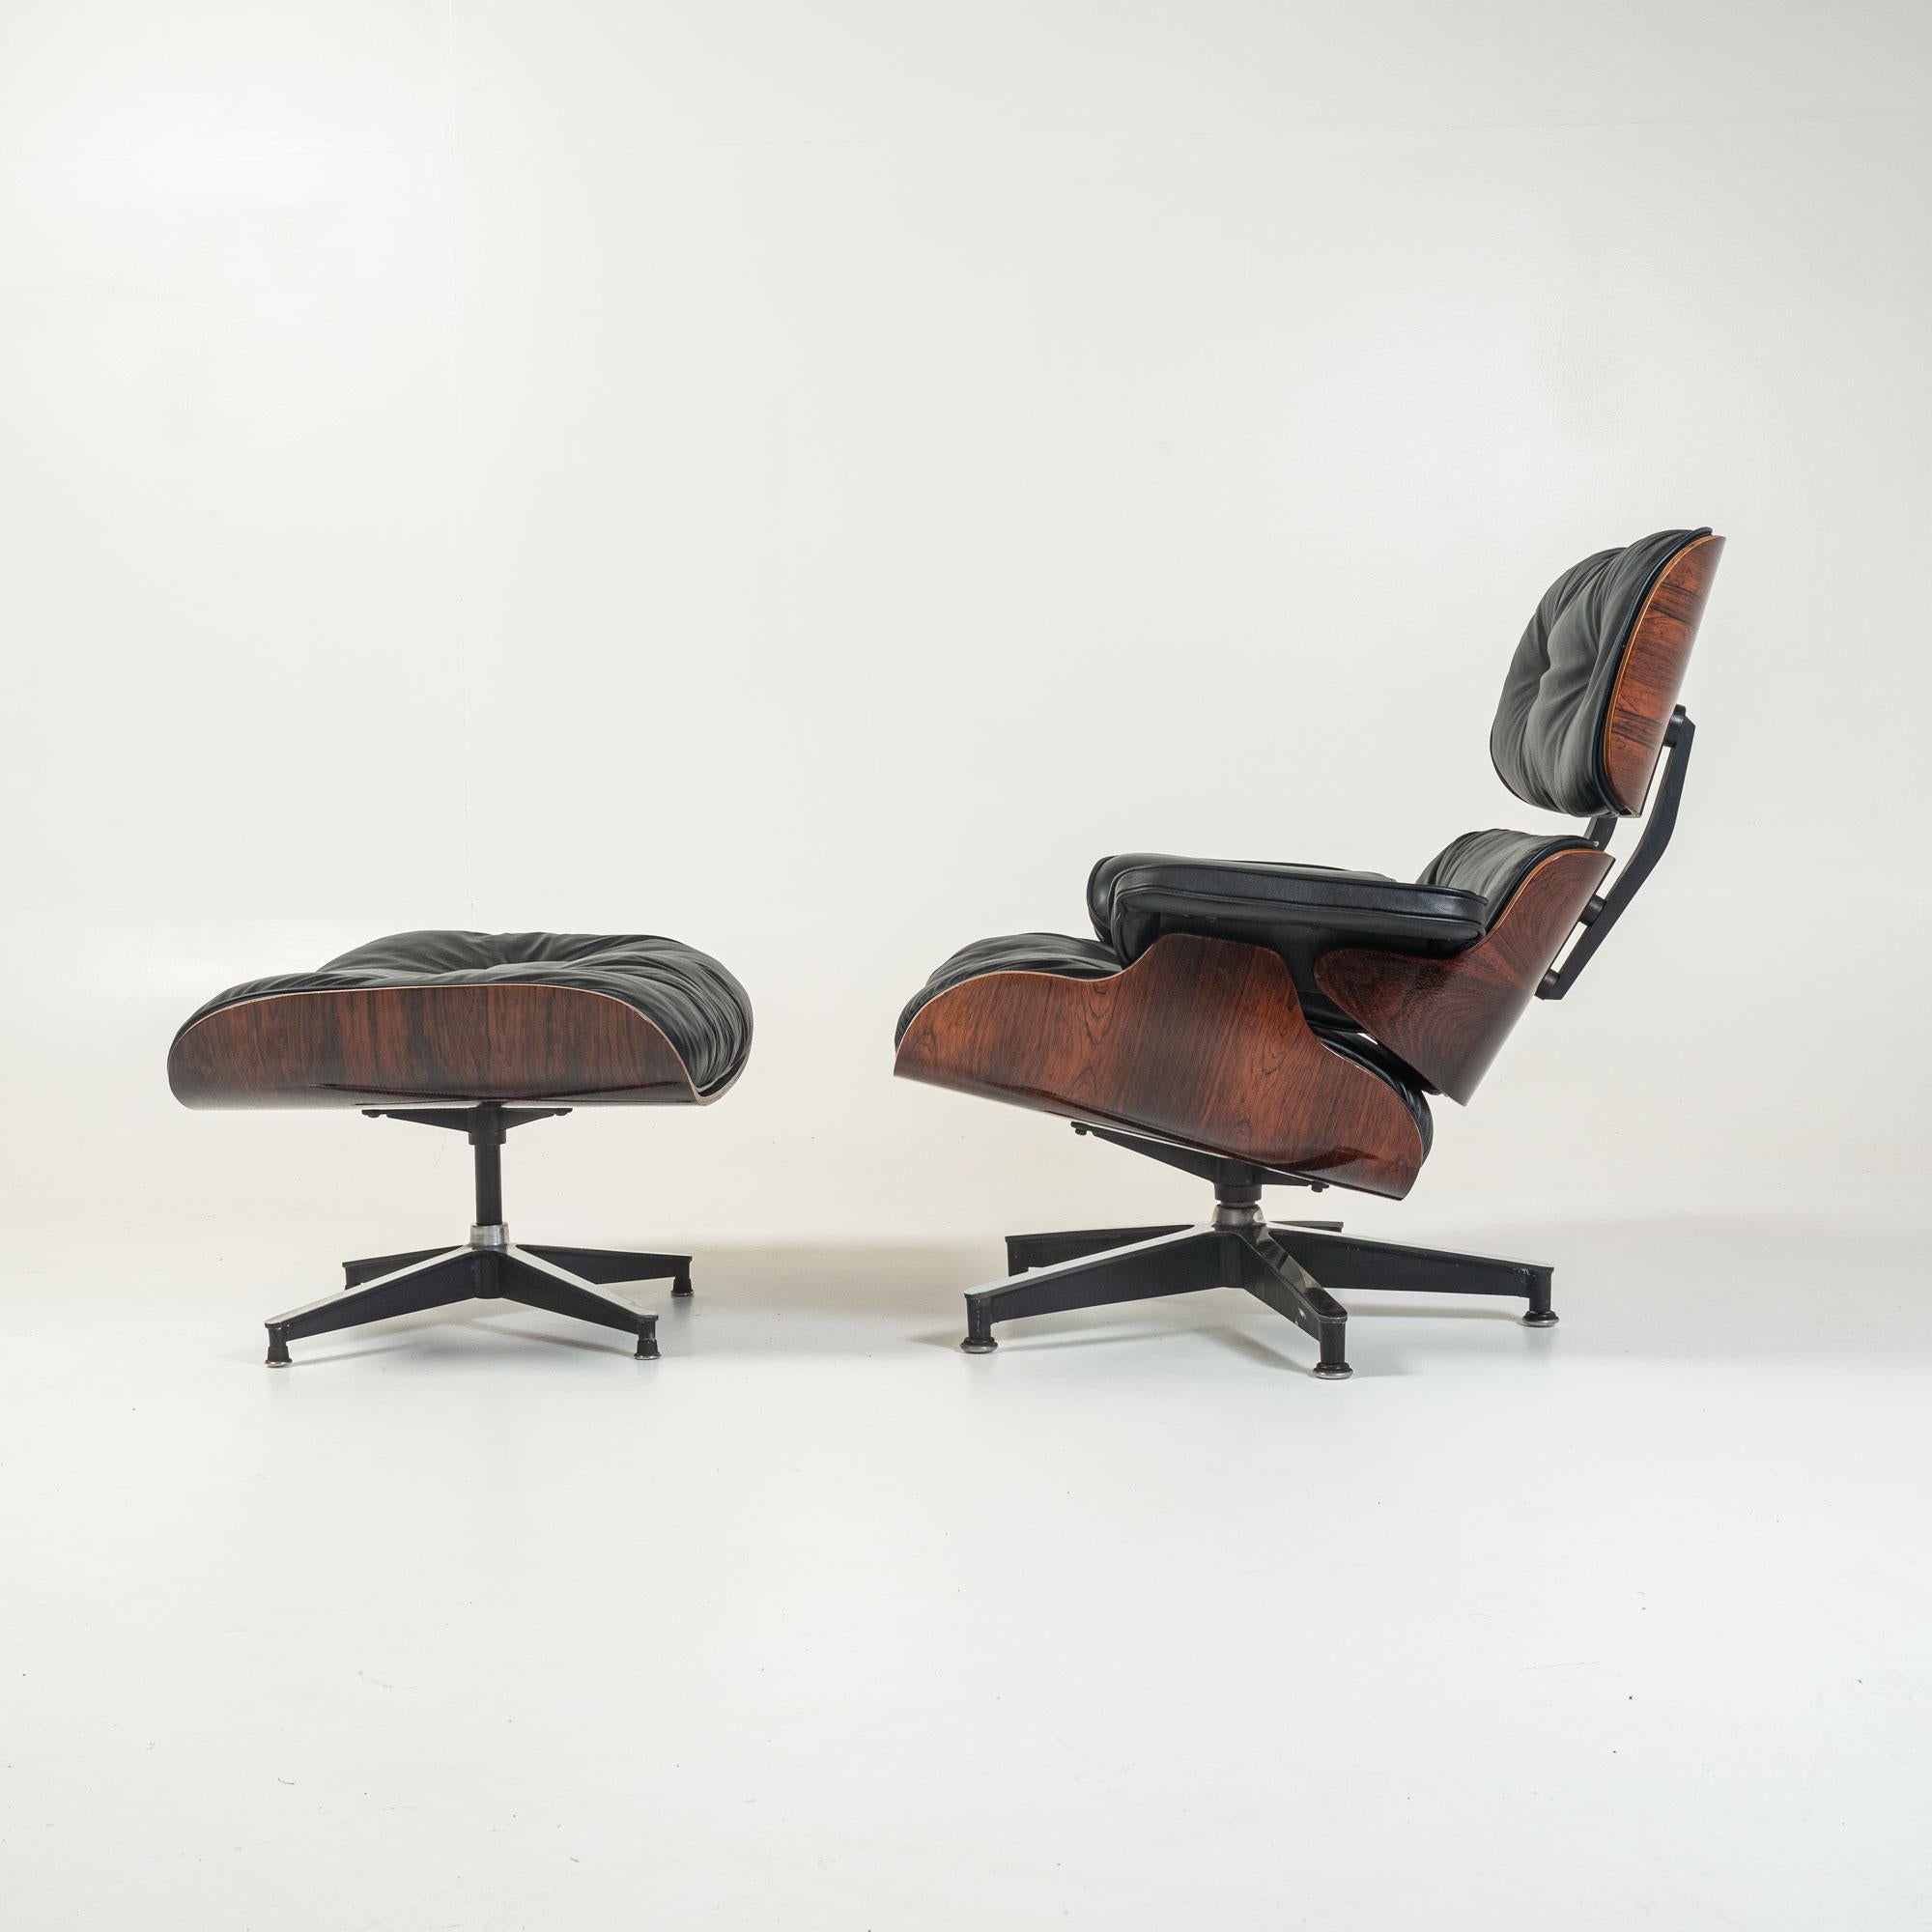 Rare and collectible 1959 Eames lounge chair with ottoman includes all the original details: three screw armrests down feather filled cushions shell stamped number 82. New shock mounts, new leather with original down feather pillow re-fluffed. Two